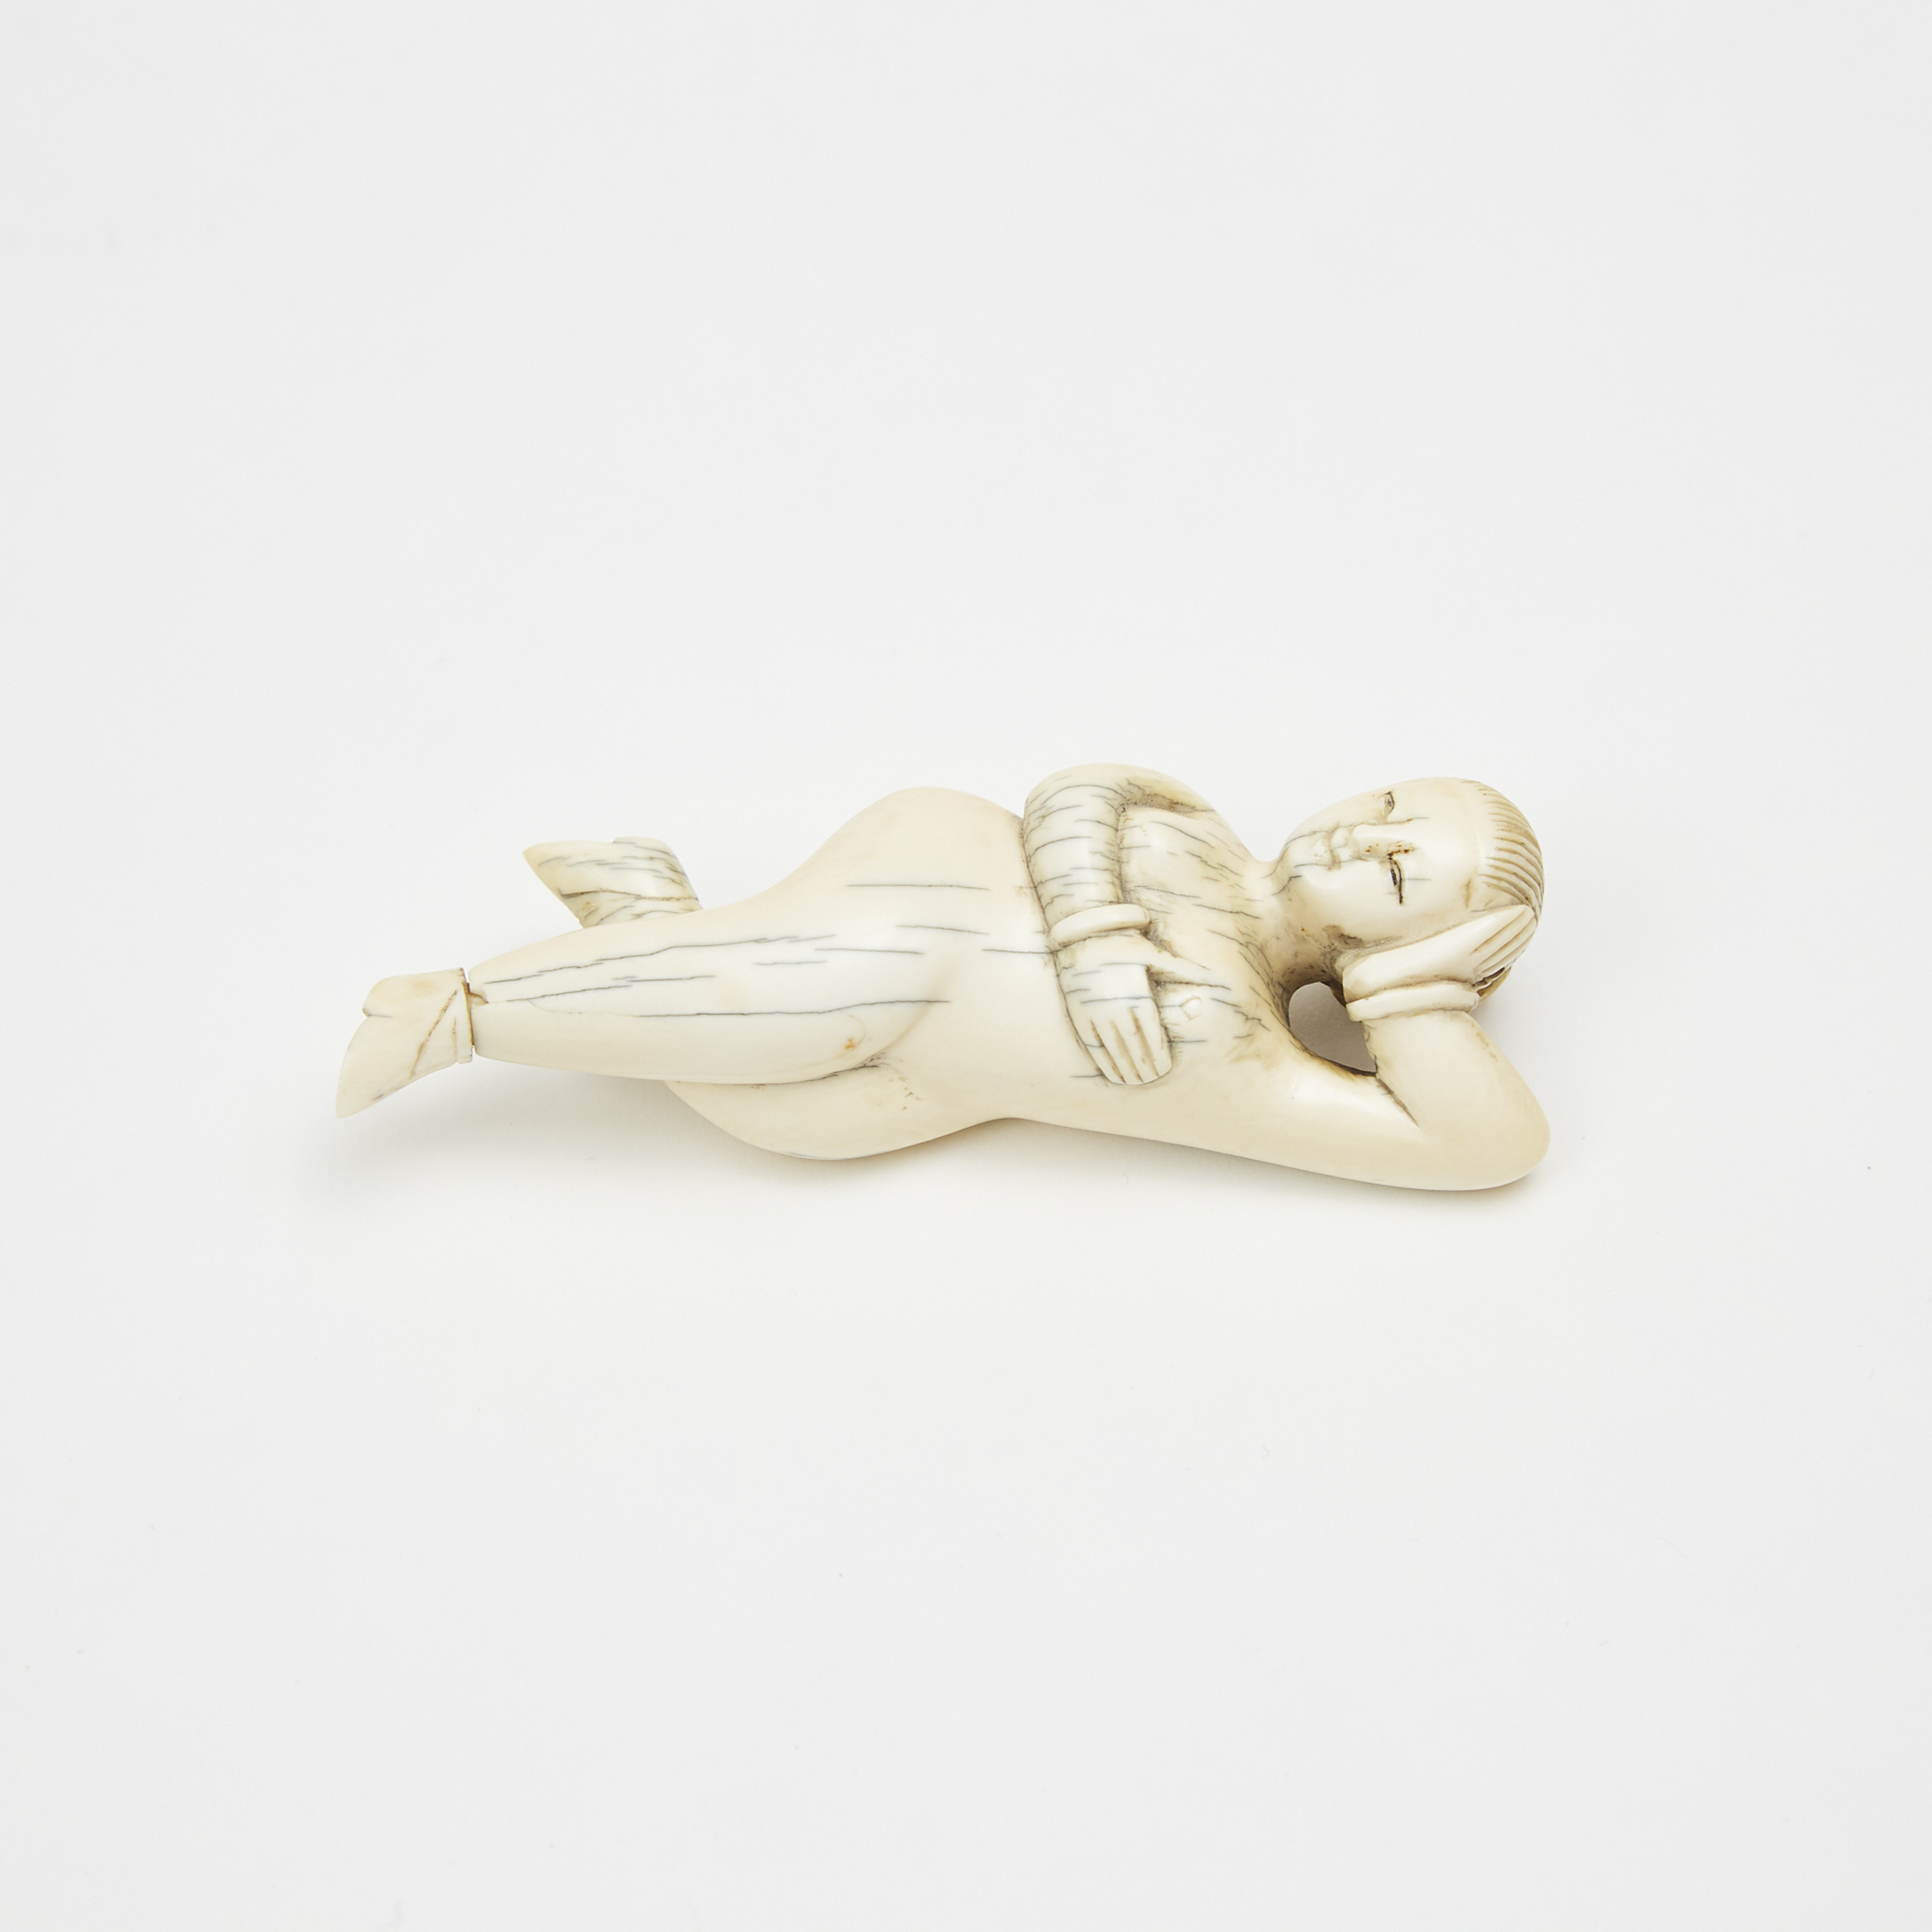 A Chinese Ivory 'Doctor's Doll' Snuff Bottle, Early 20th Century